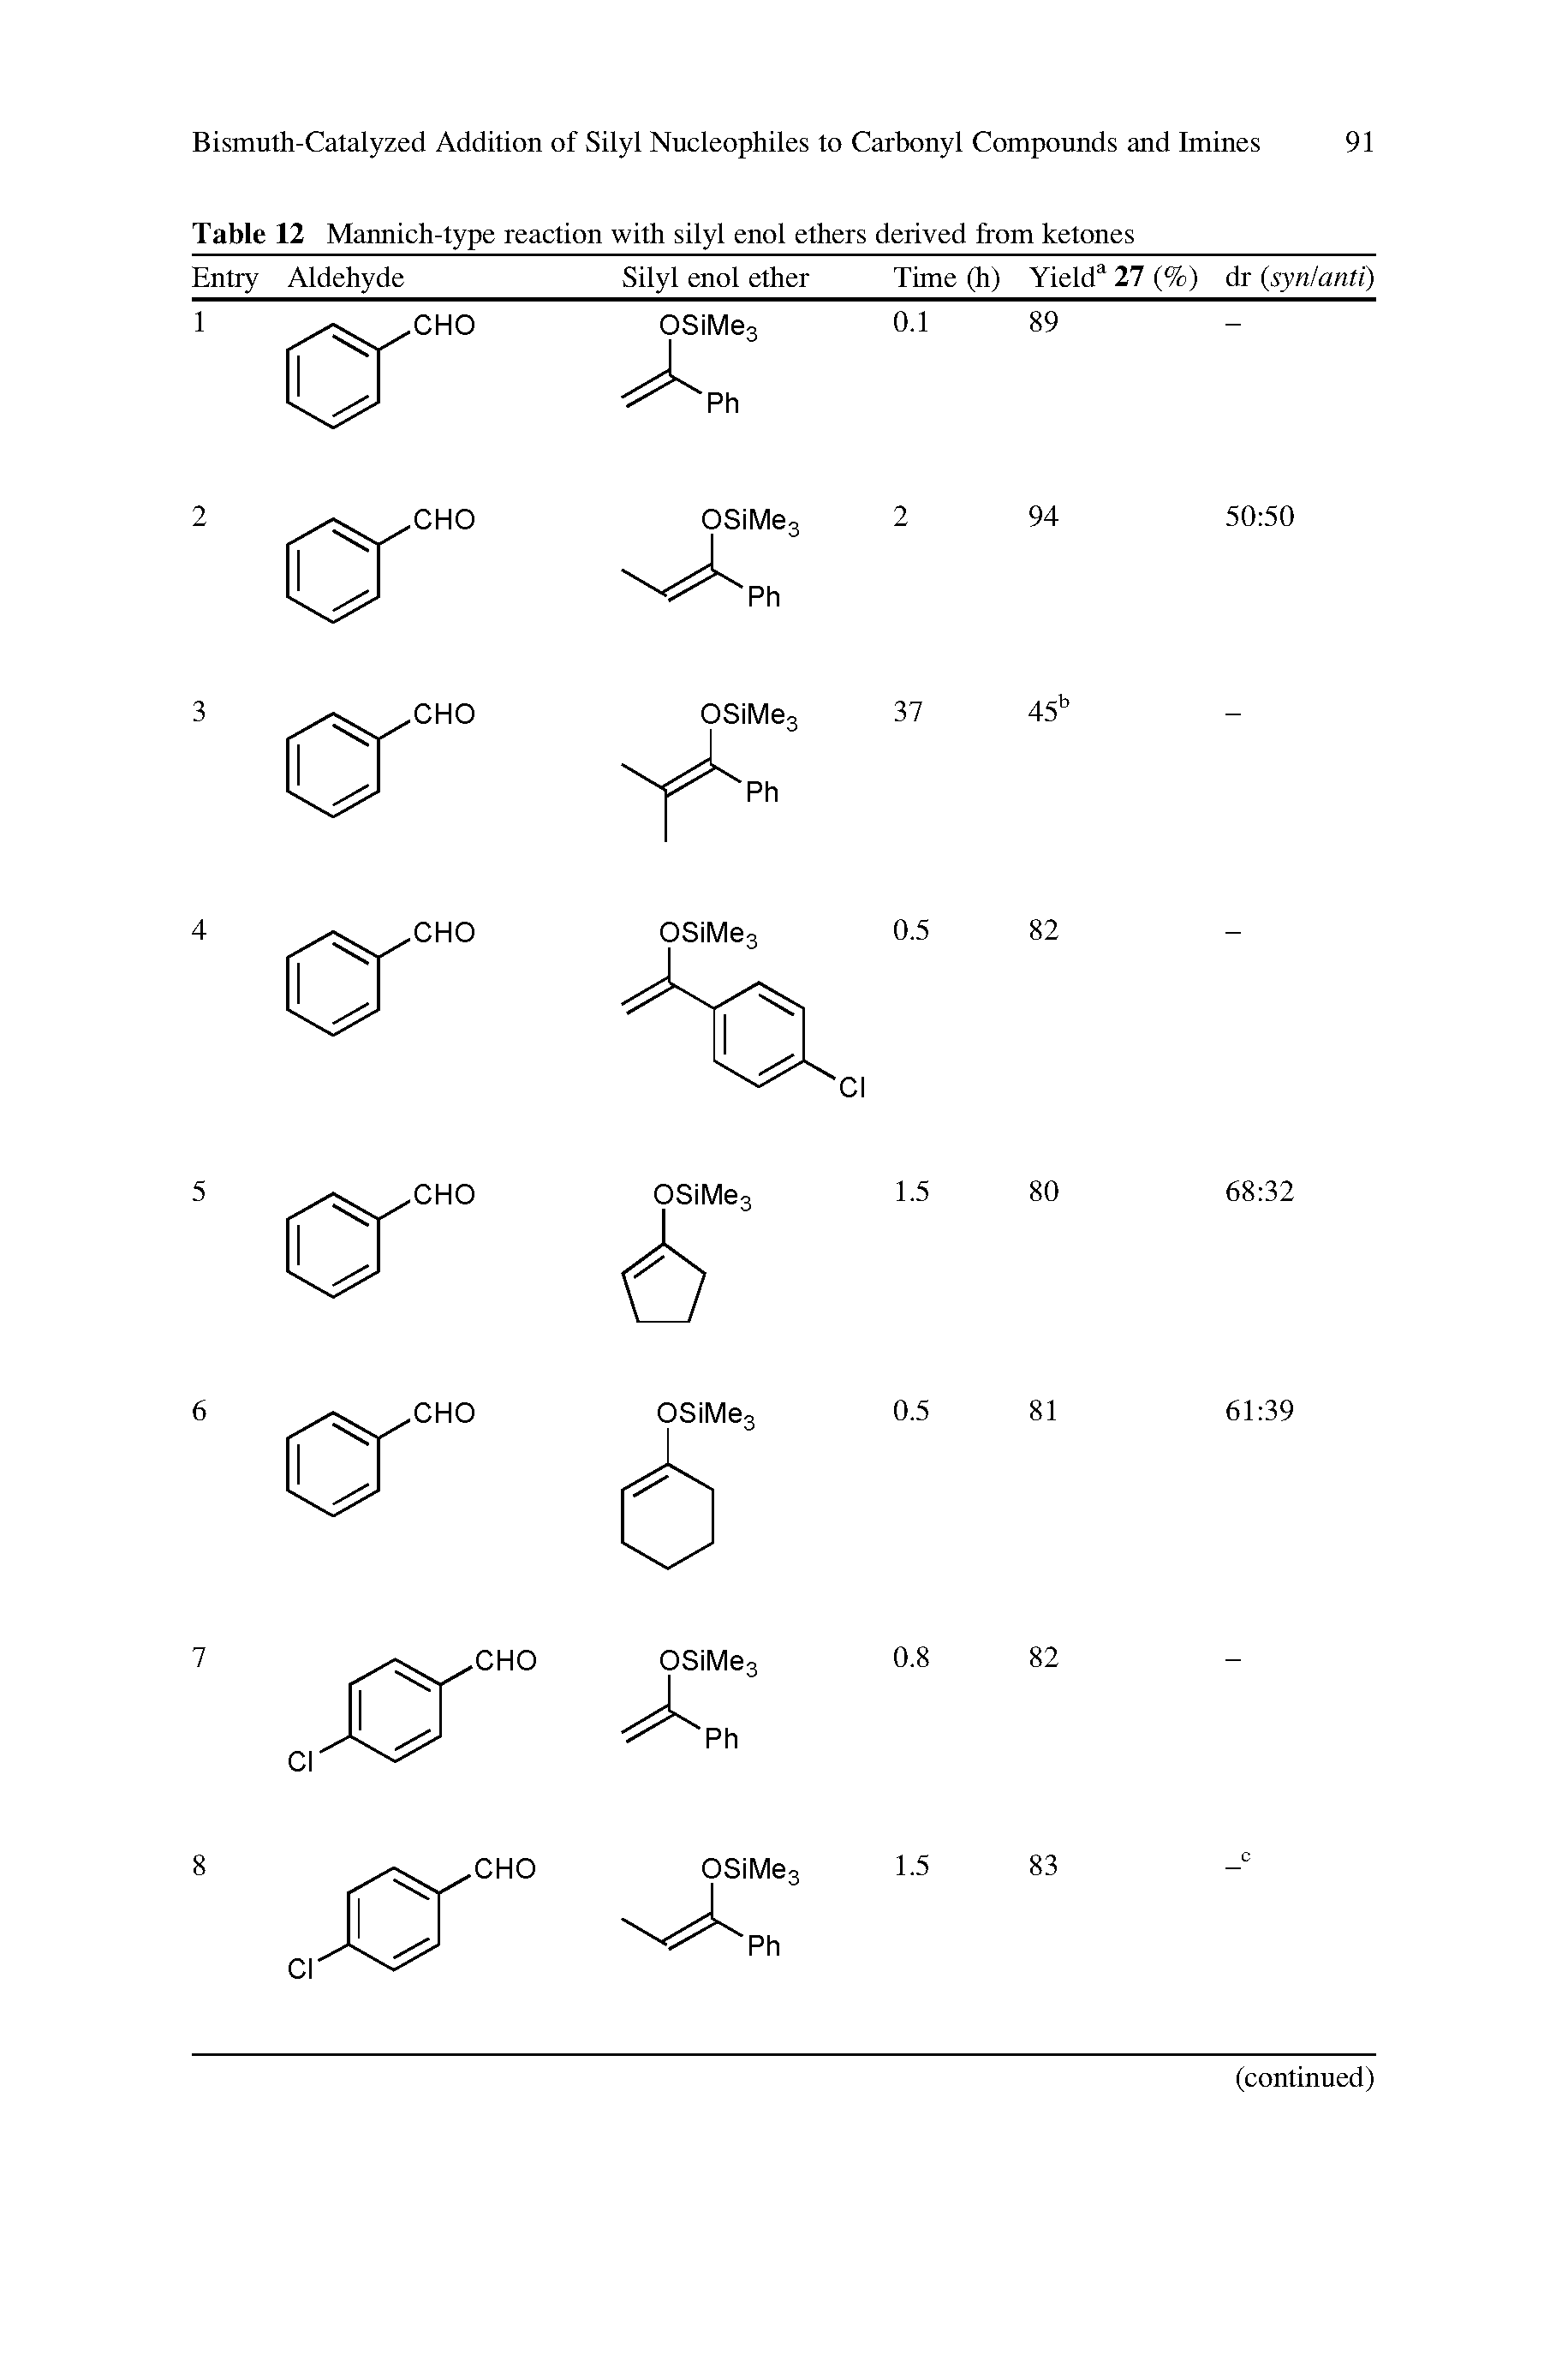 Table 12 Mannich-type reaction with silyl enol ethers derived from ketones...